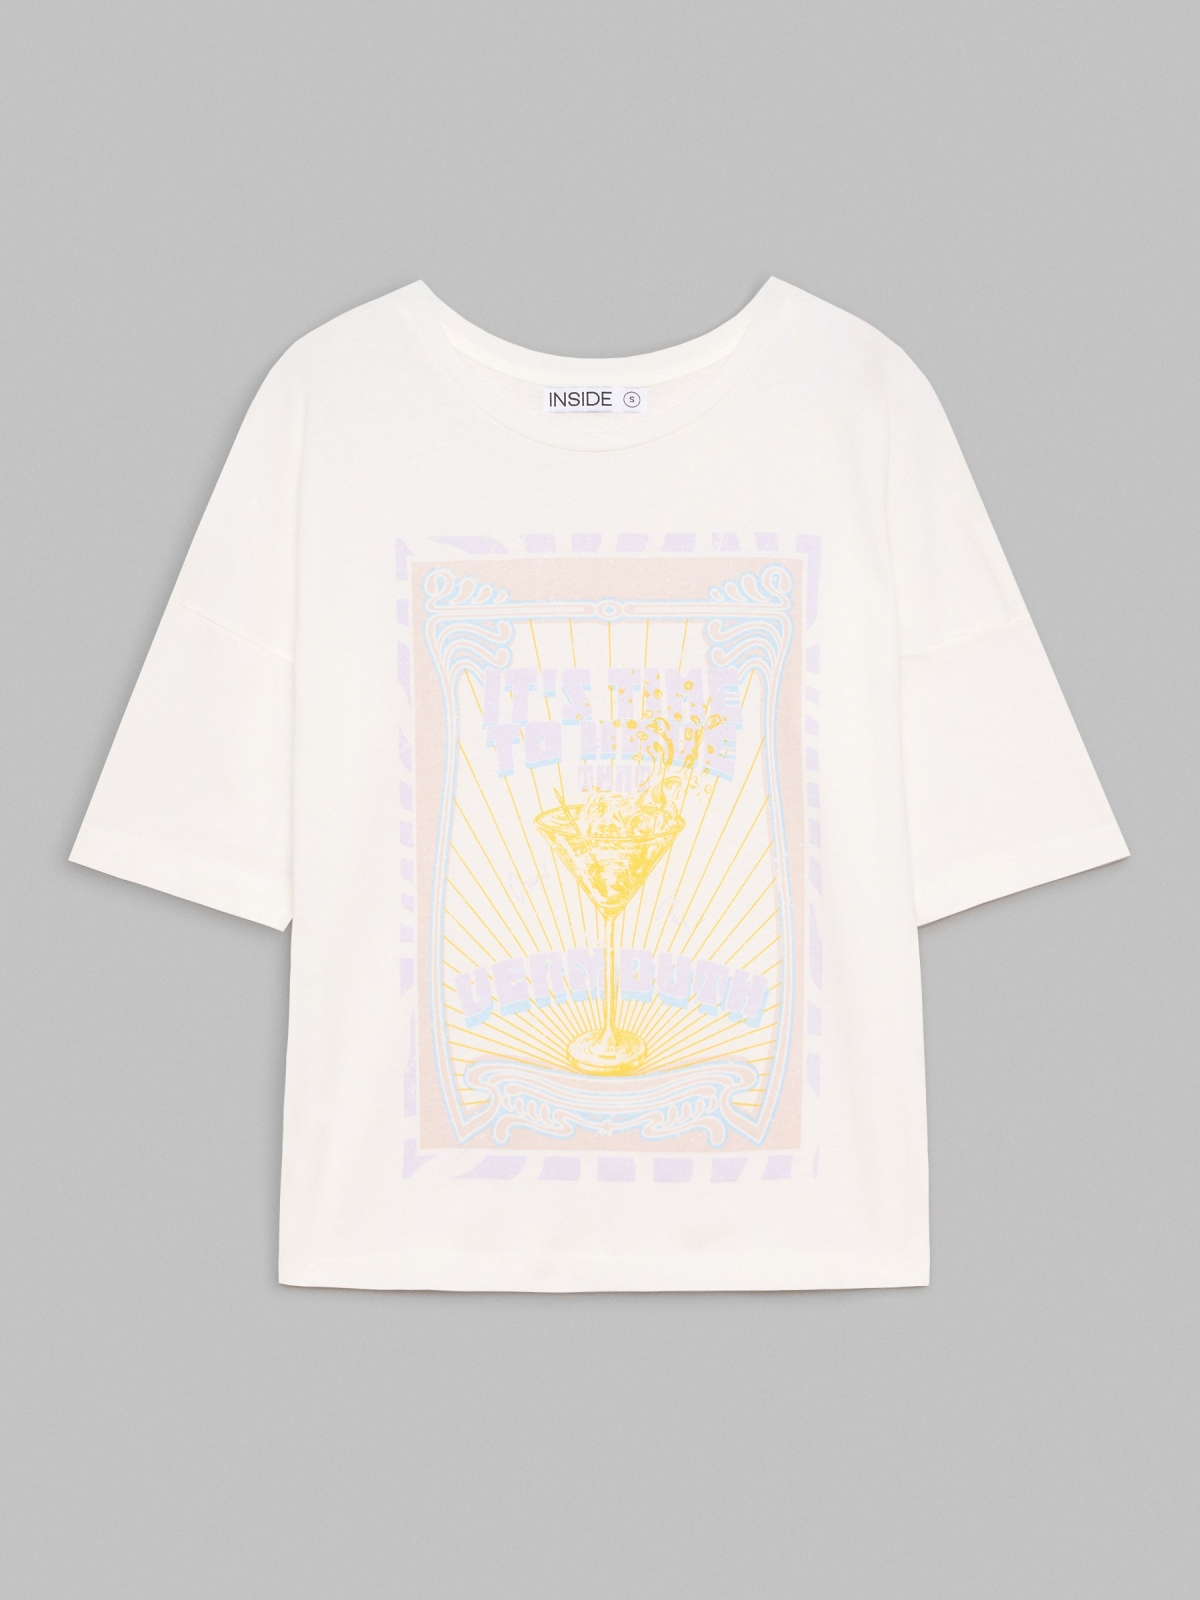  Vermouth 3/4 sleeve t-shirt off white